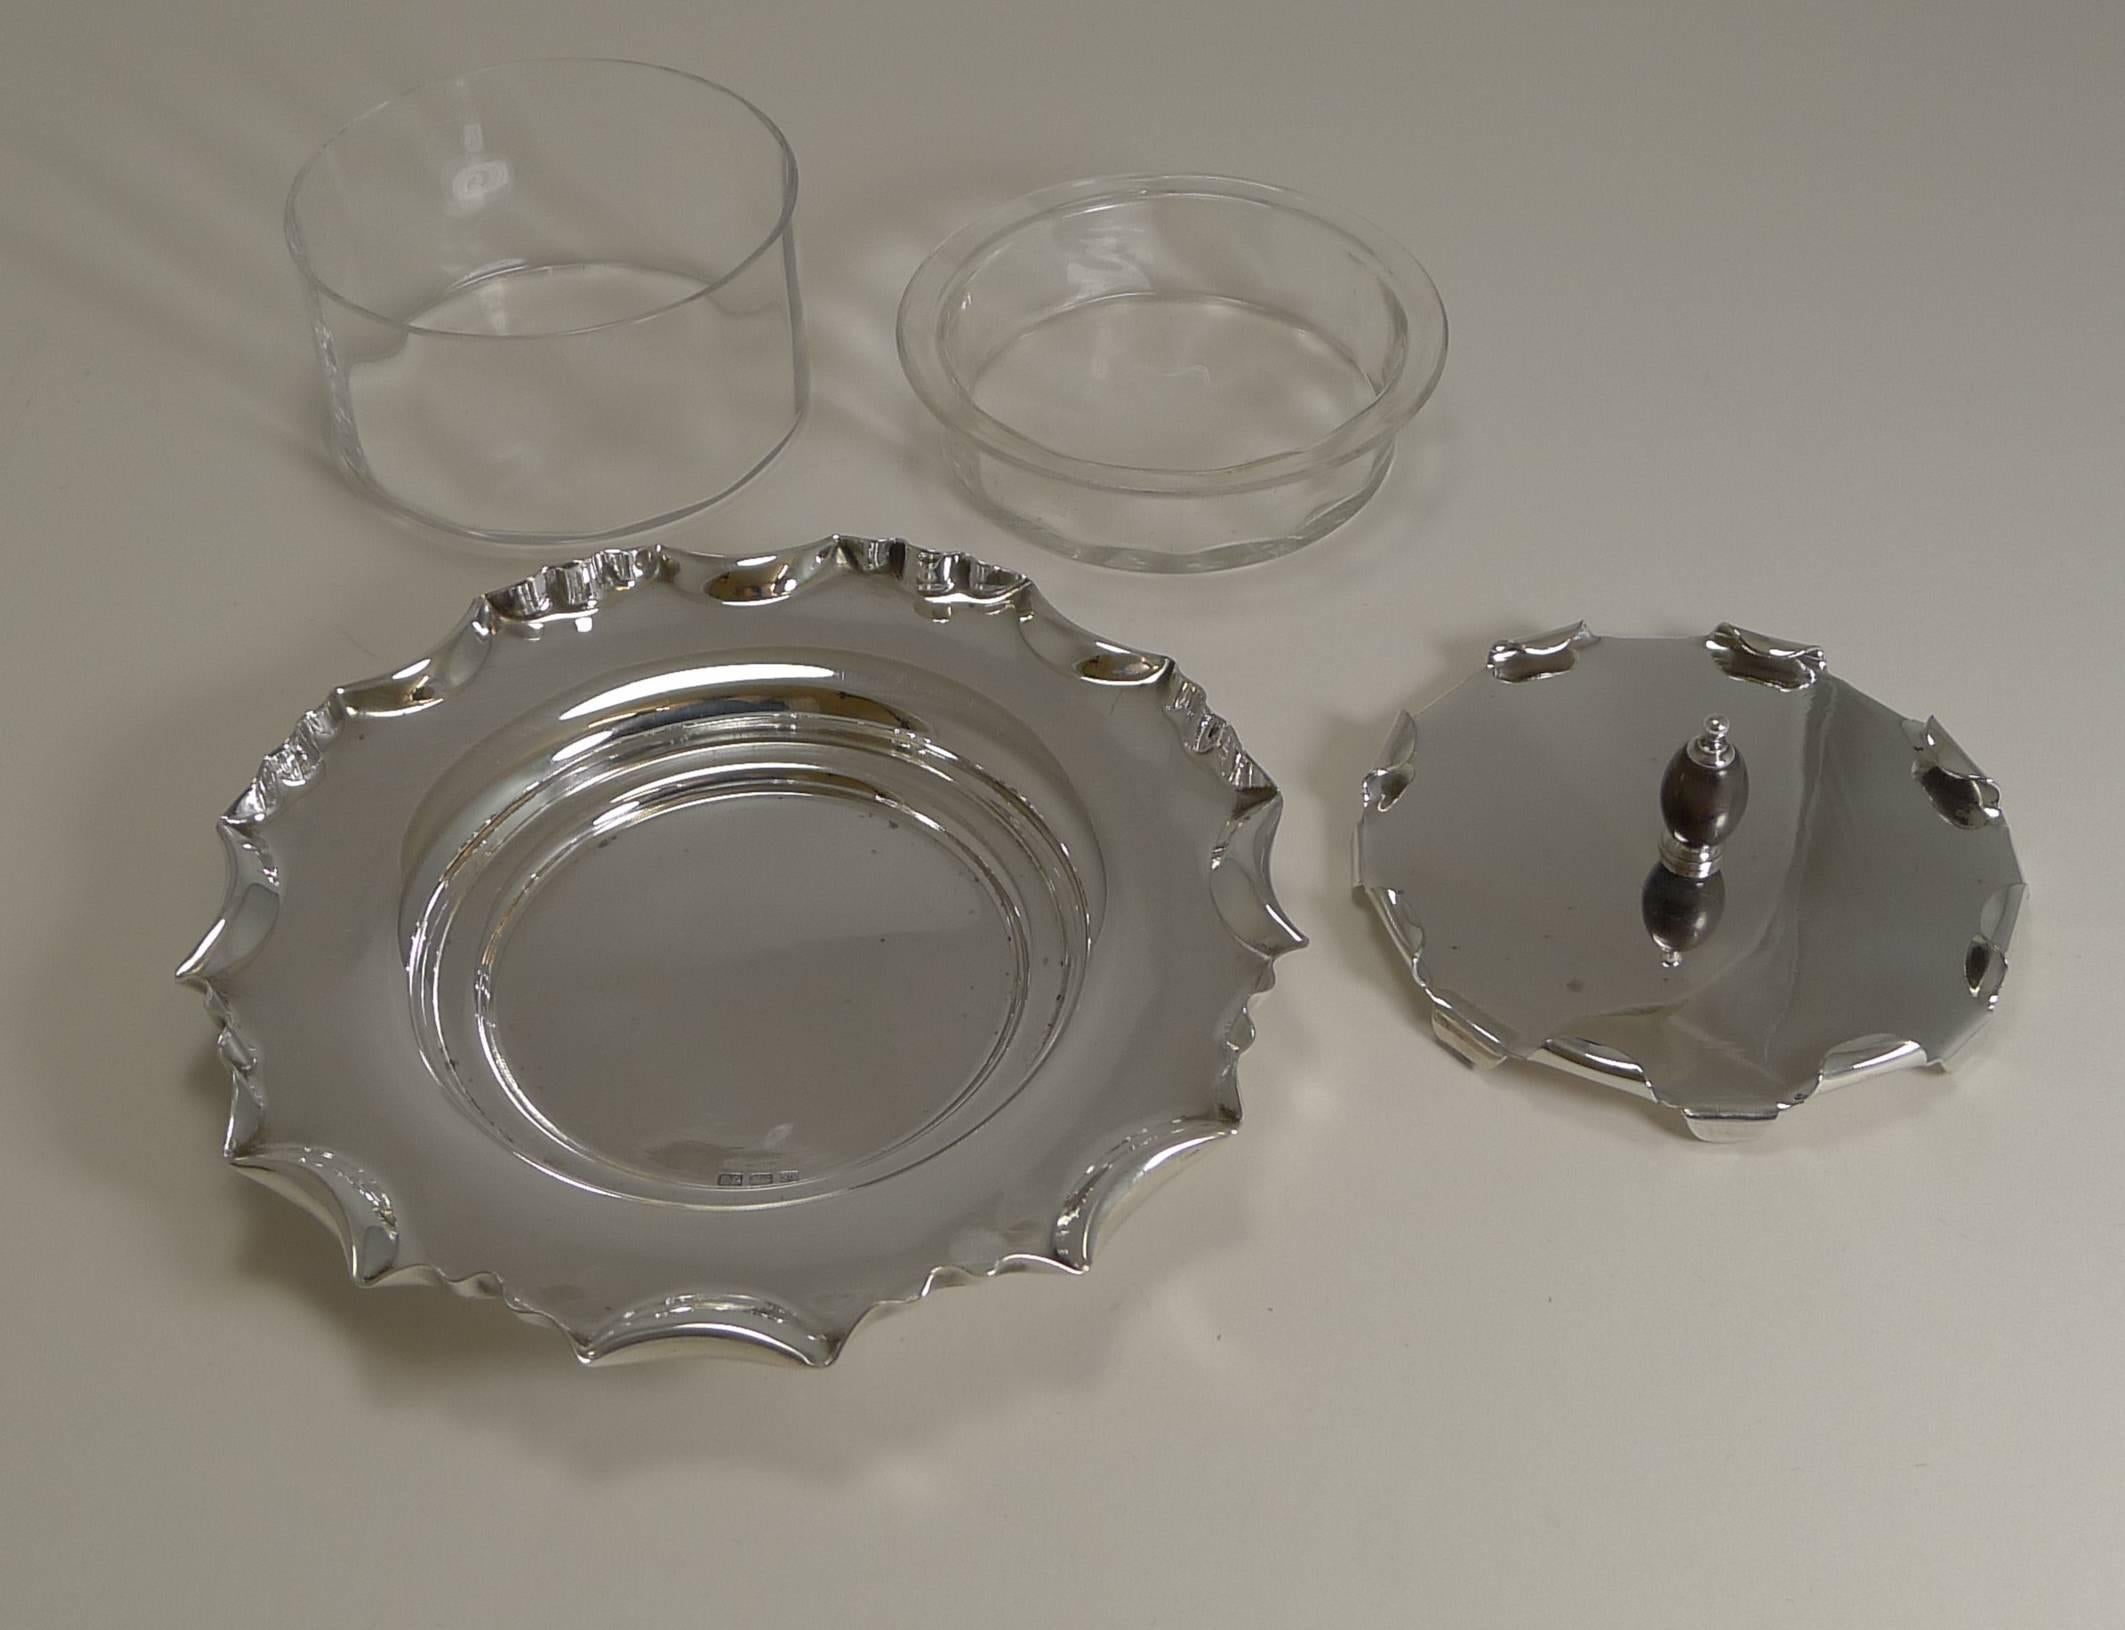 A lovely Edwardian Caviar server or dish, made from English silver plate and glass.

There are two dishes, the larger one which would be filled with crushed ice and the smaller one which fits over the ice and would contain the Caviar, keeping it